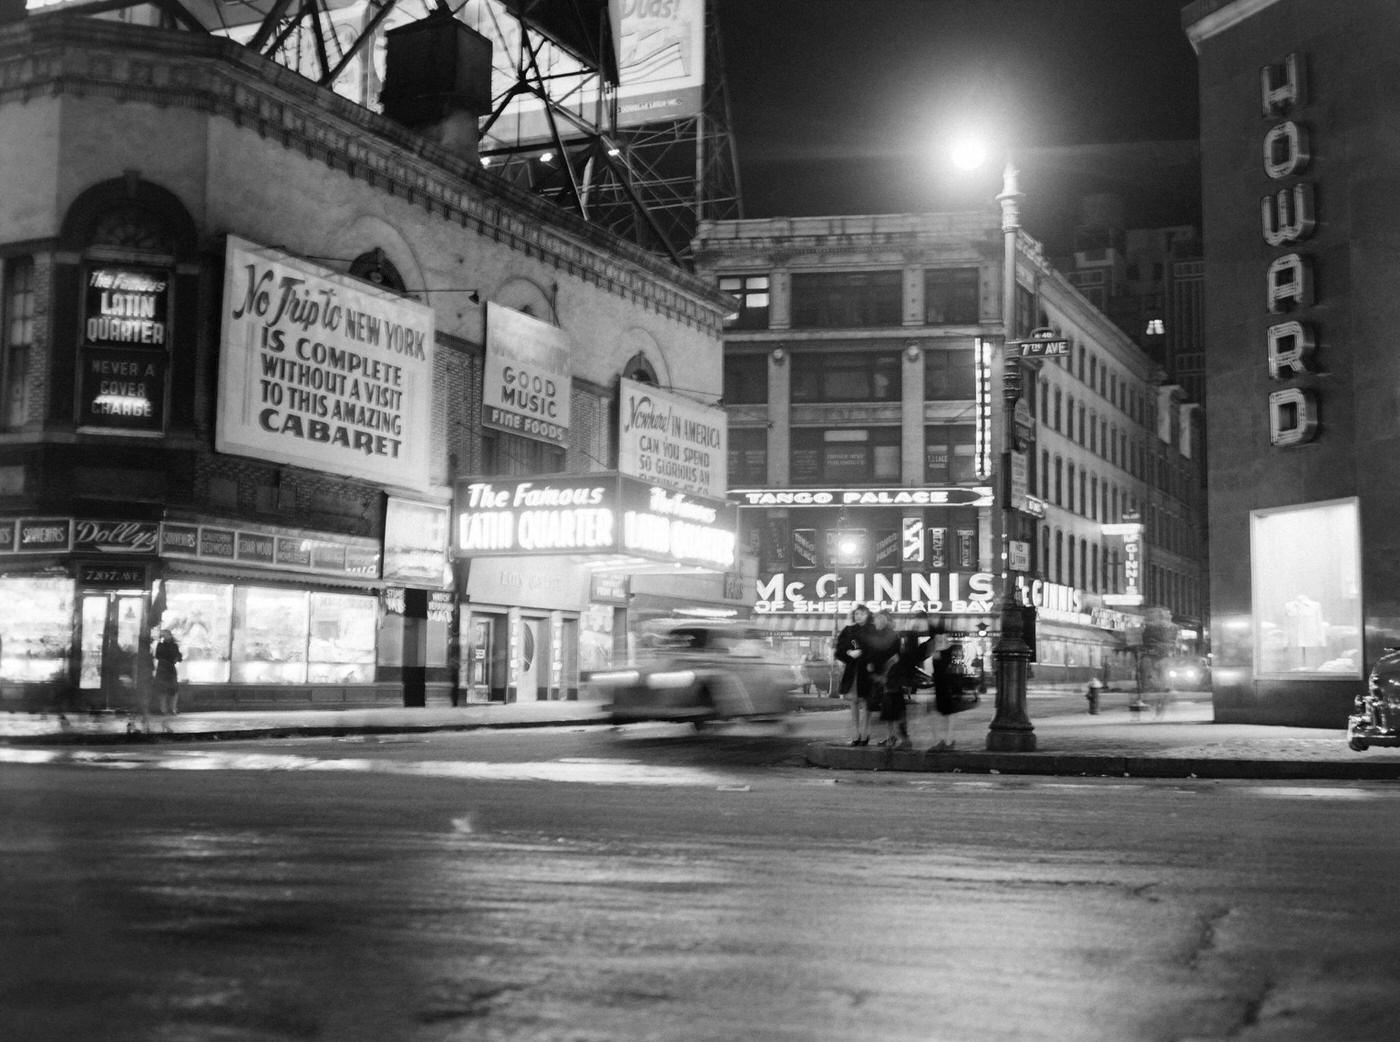 Famous Latin Quarter Night Club On The Corner Of Broadway And West 48Th Street In Manhattan, 1946